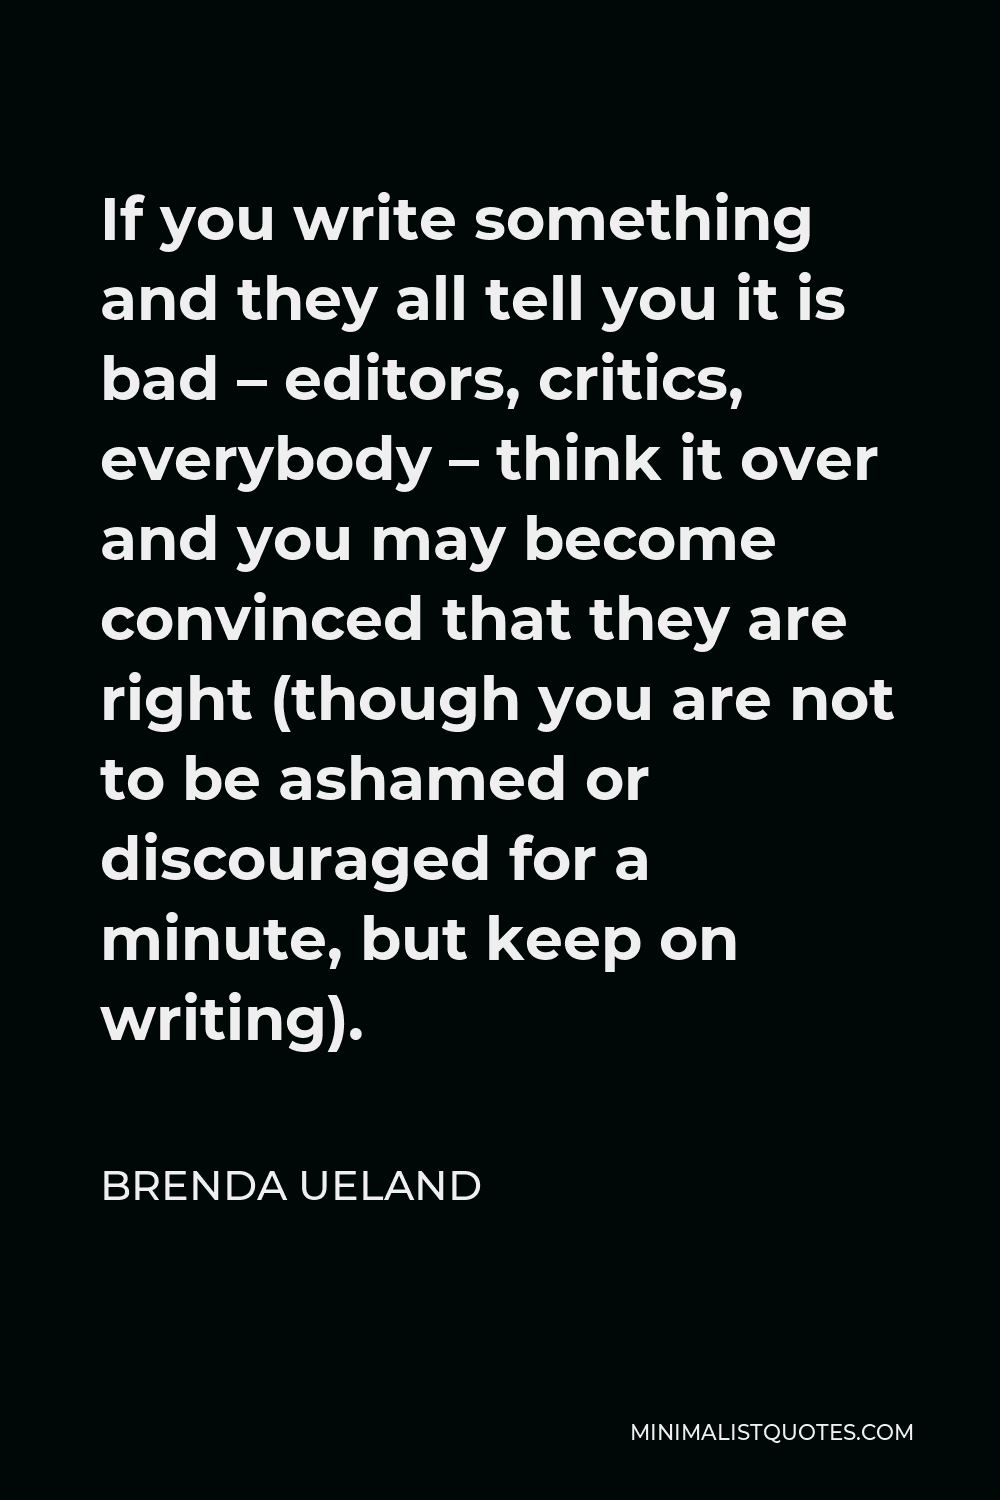 Brenda Ueland Quote - If you write something and they all tell you it is bad – editors, critics, everybody – think it over and you may become convinced that they are right (though you are not to be ashamed or discouraged for a minute, but keep on writing).